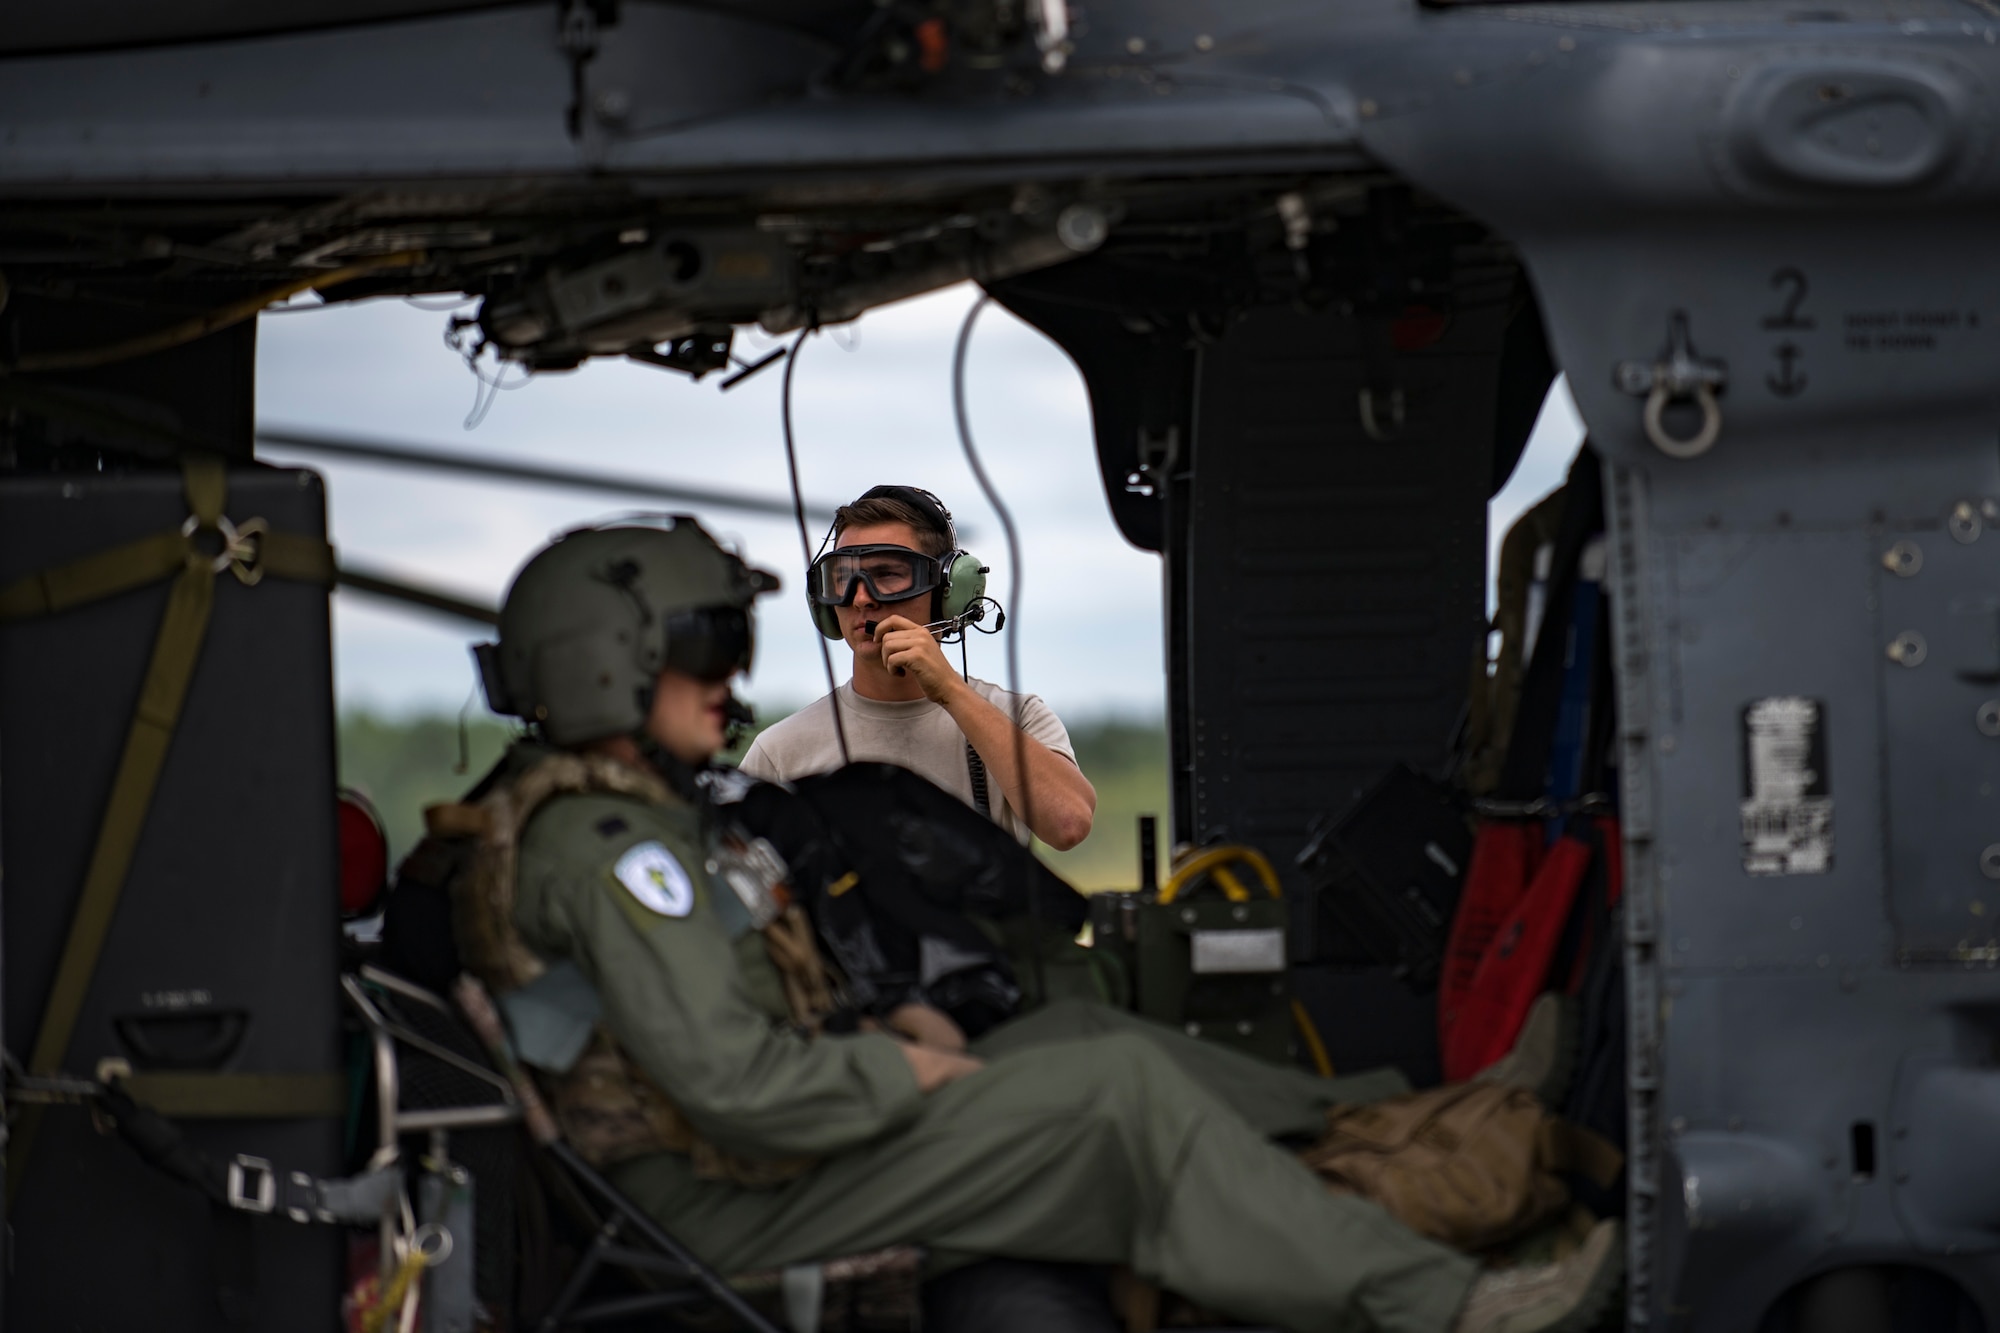 U.S. Air Force 41st Rescue Squadron HH-60G Pave Hawk crew members conduct preflight procedures, Aug. 26, 2017, at Moody Air Force Base, Ga.